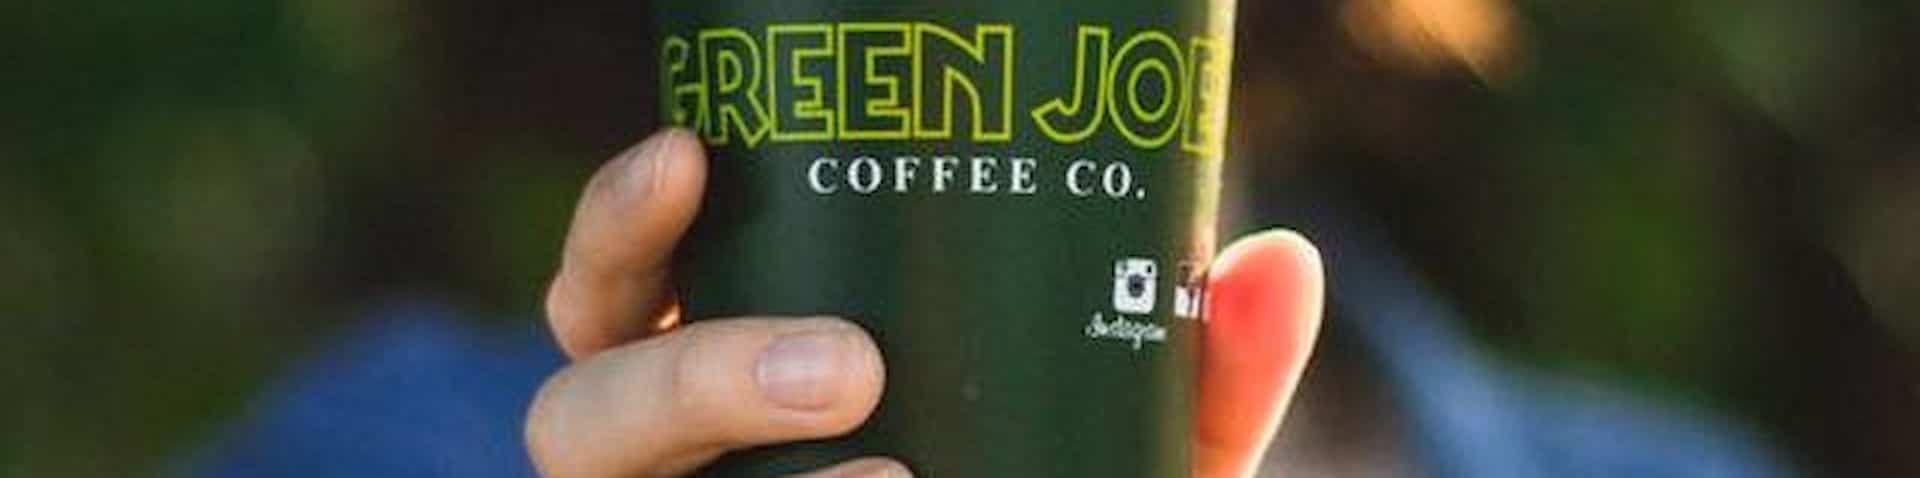 holding a coffee cup with Green Joe's logo